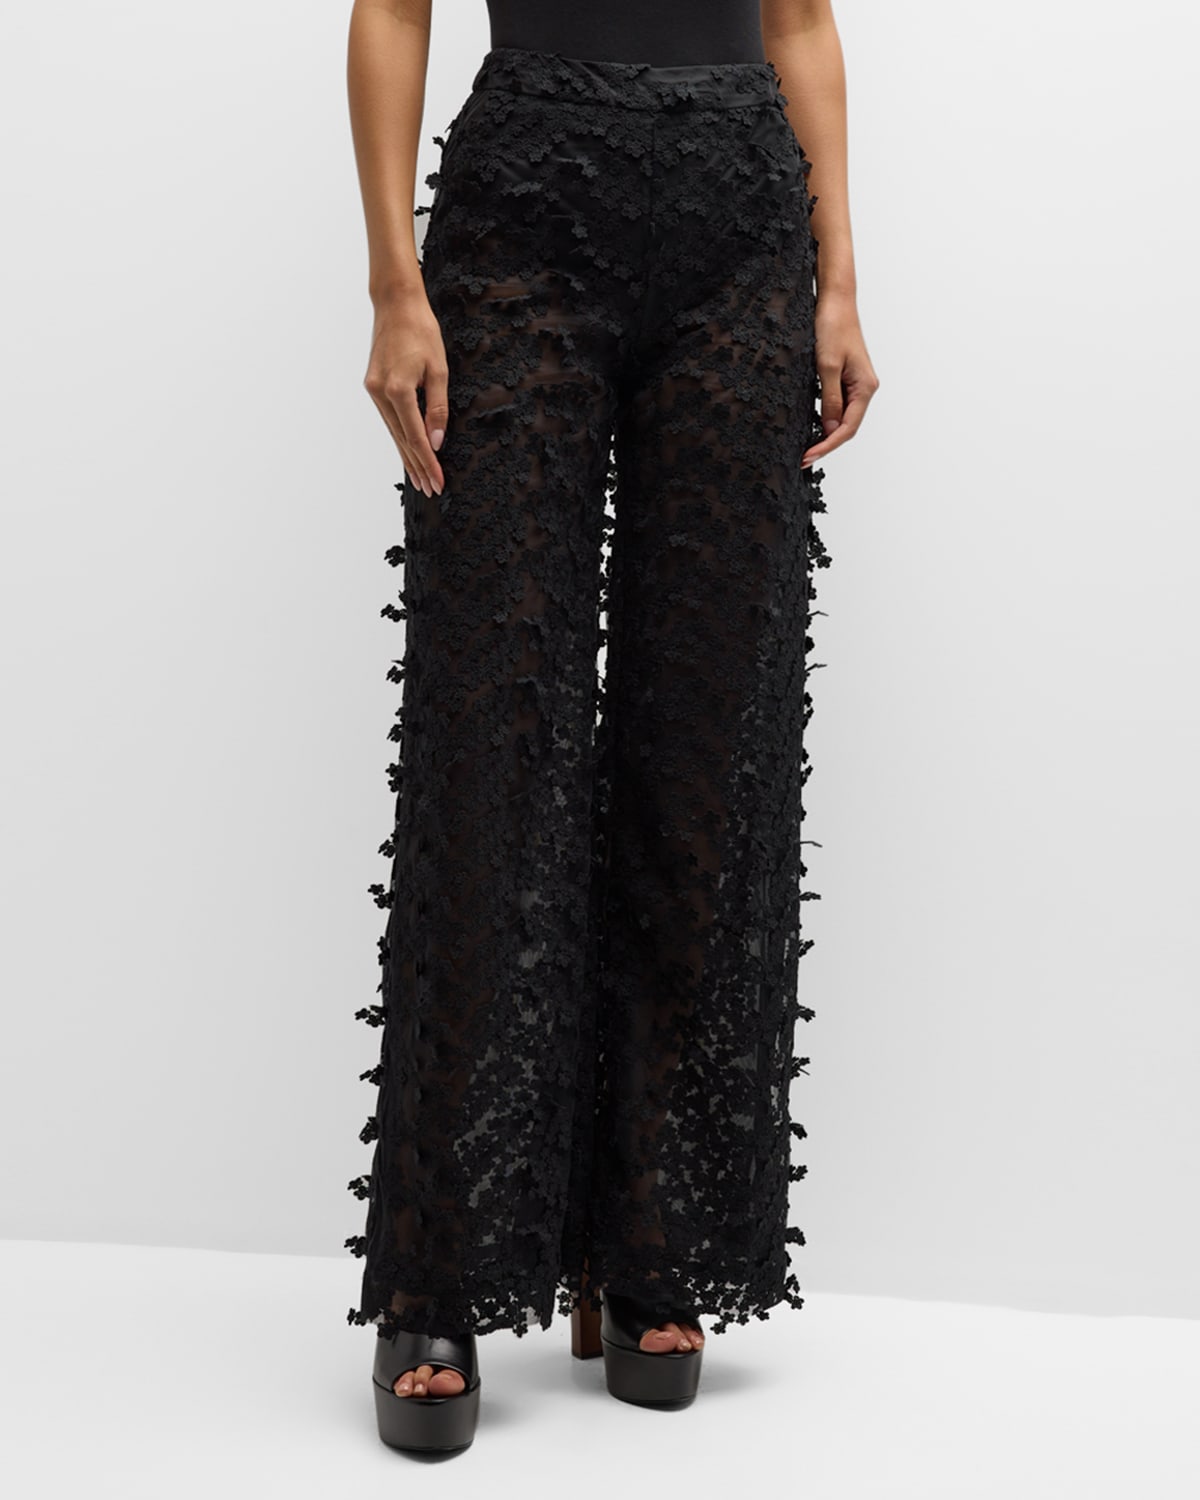 CYNTHIA ROWLEY HIGH-RISE FLORAL APPLIQUE TULLE PANTS